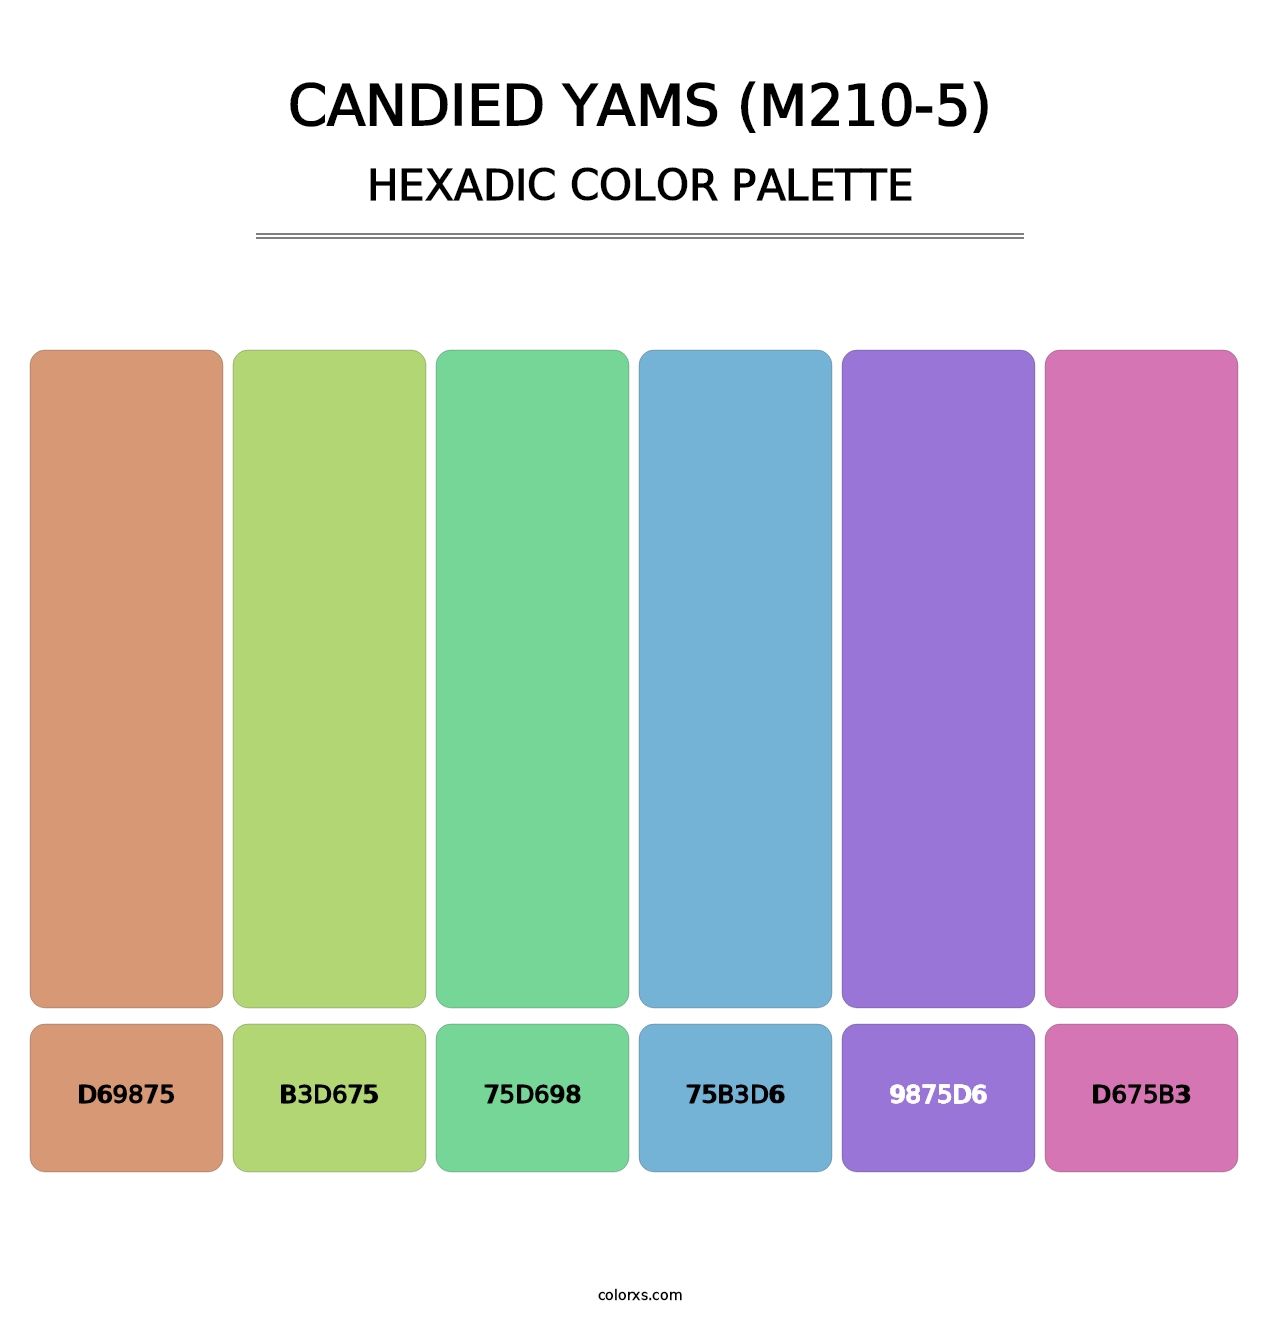 Candied Yams (M210-5) - Hexadic Color Palette